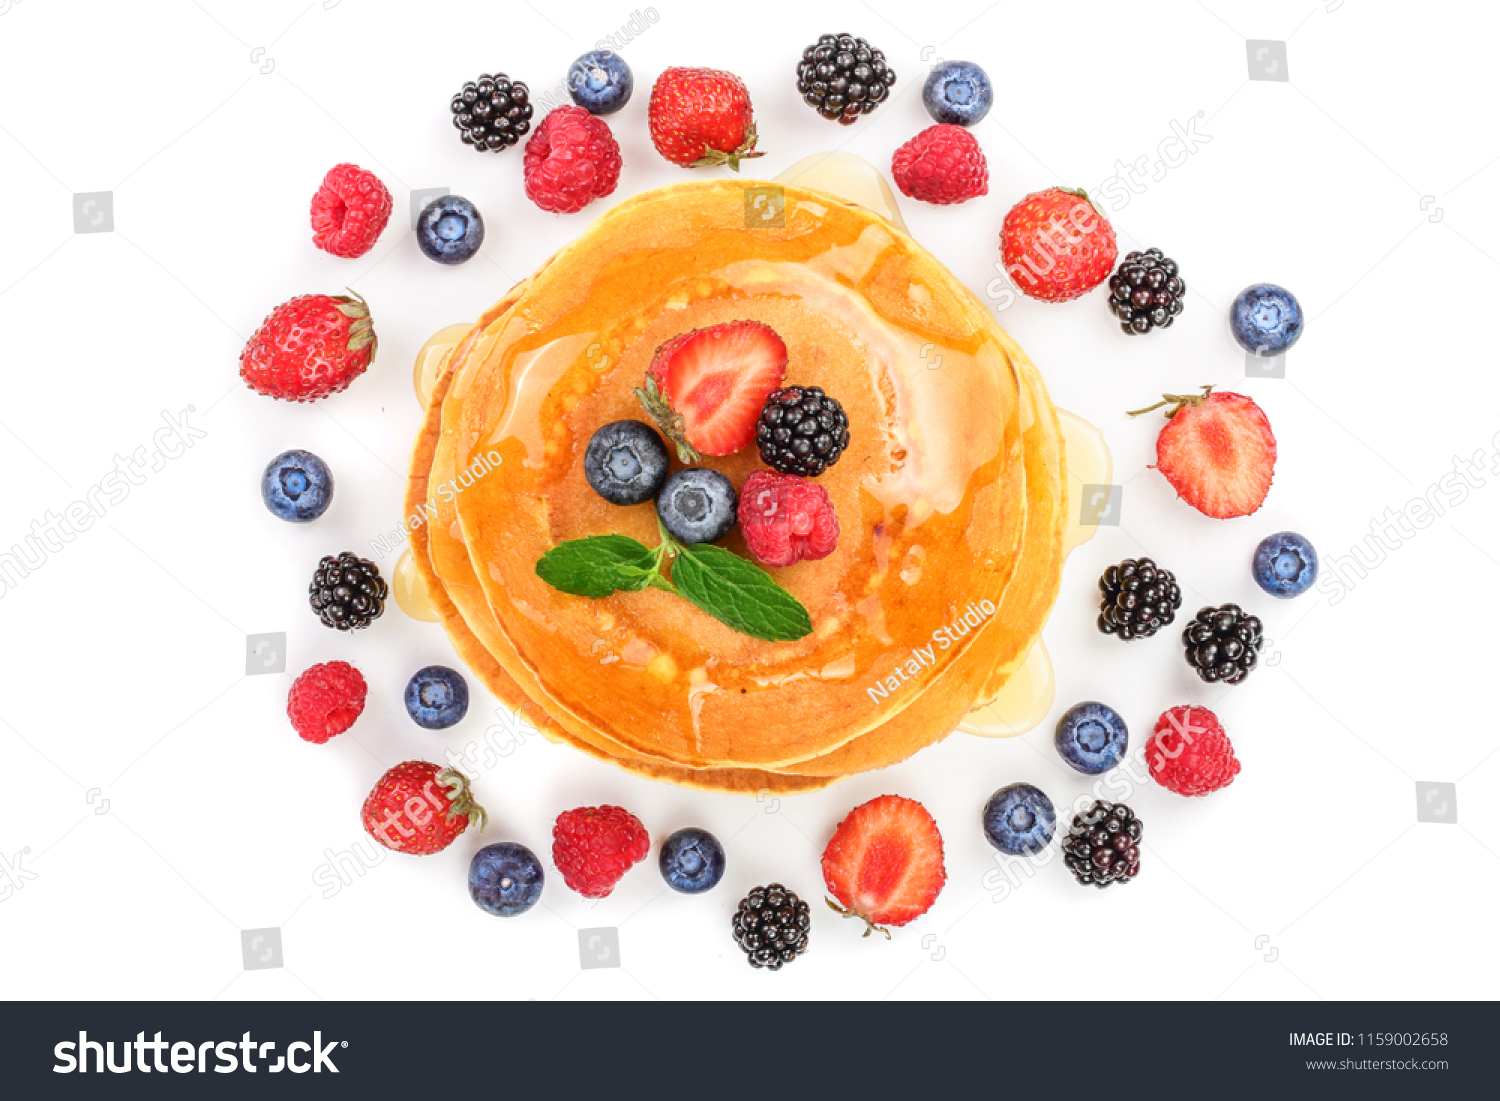 Pancakes stack with different berries isolated on white background. Top view. Flat lay #1159002658